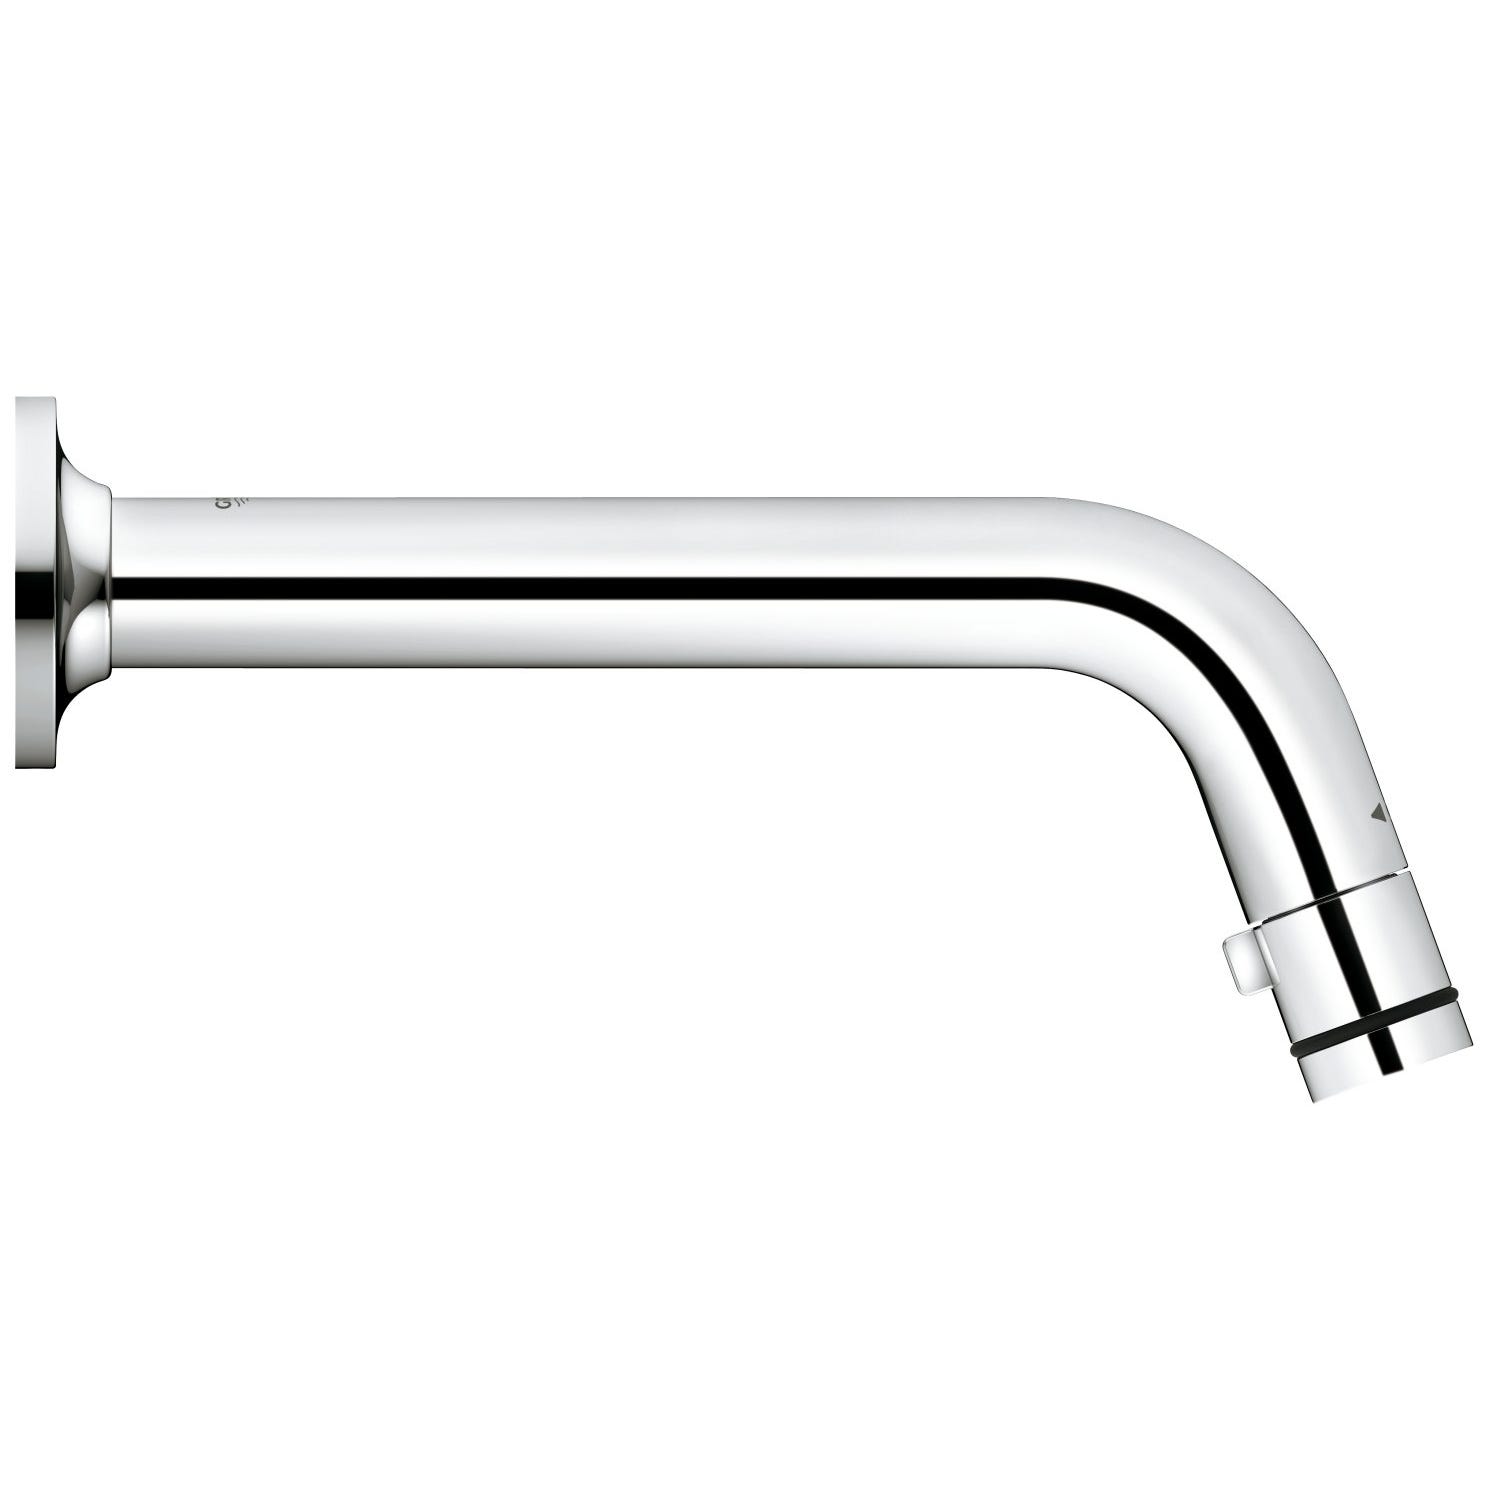 Grohe UNIVERSAL NEW - Robinet universel montage mural (20203000) 2